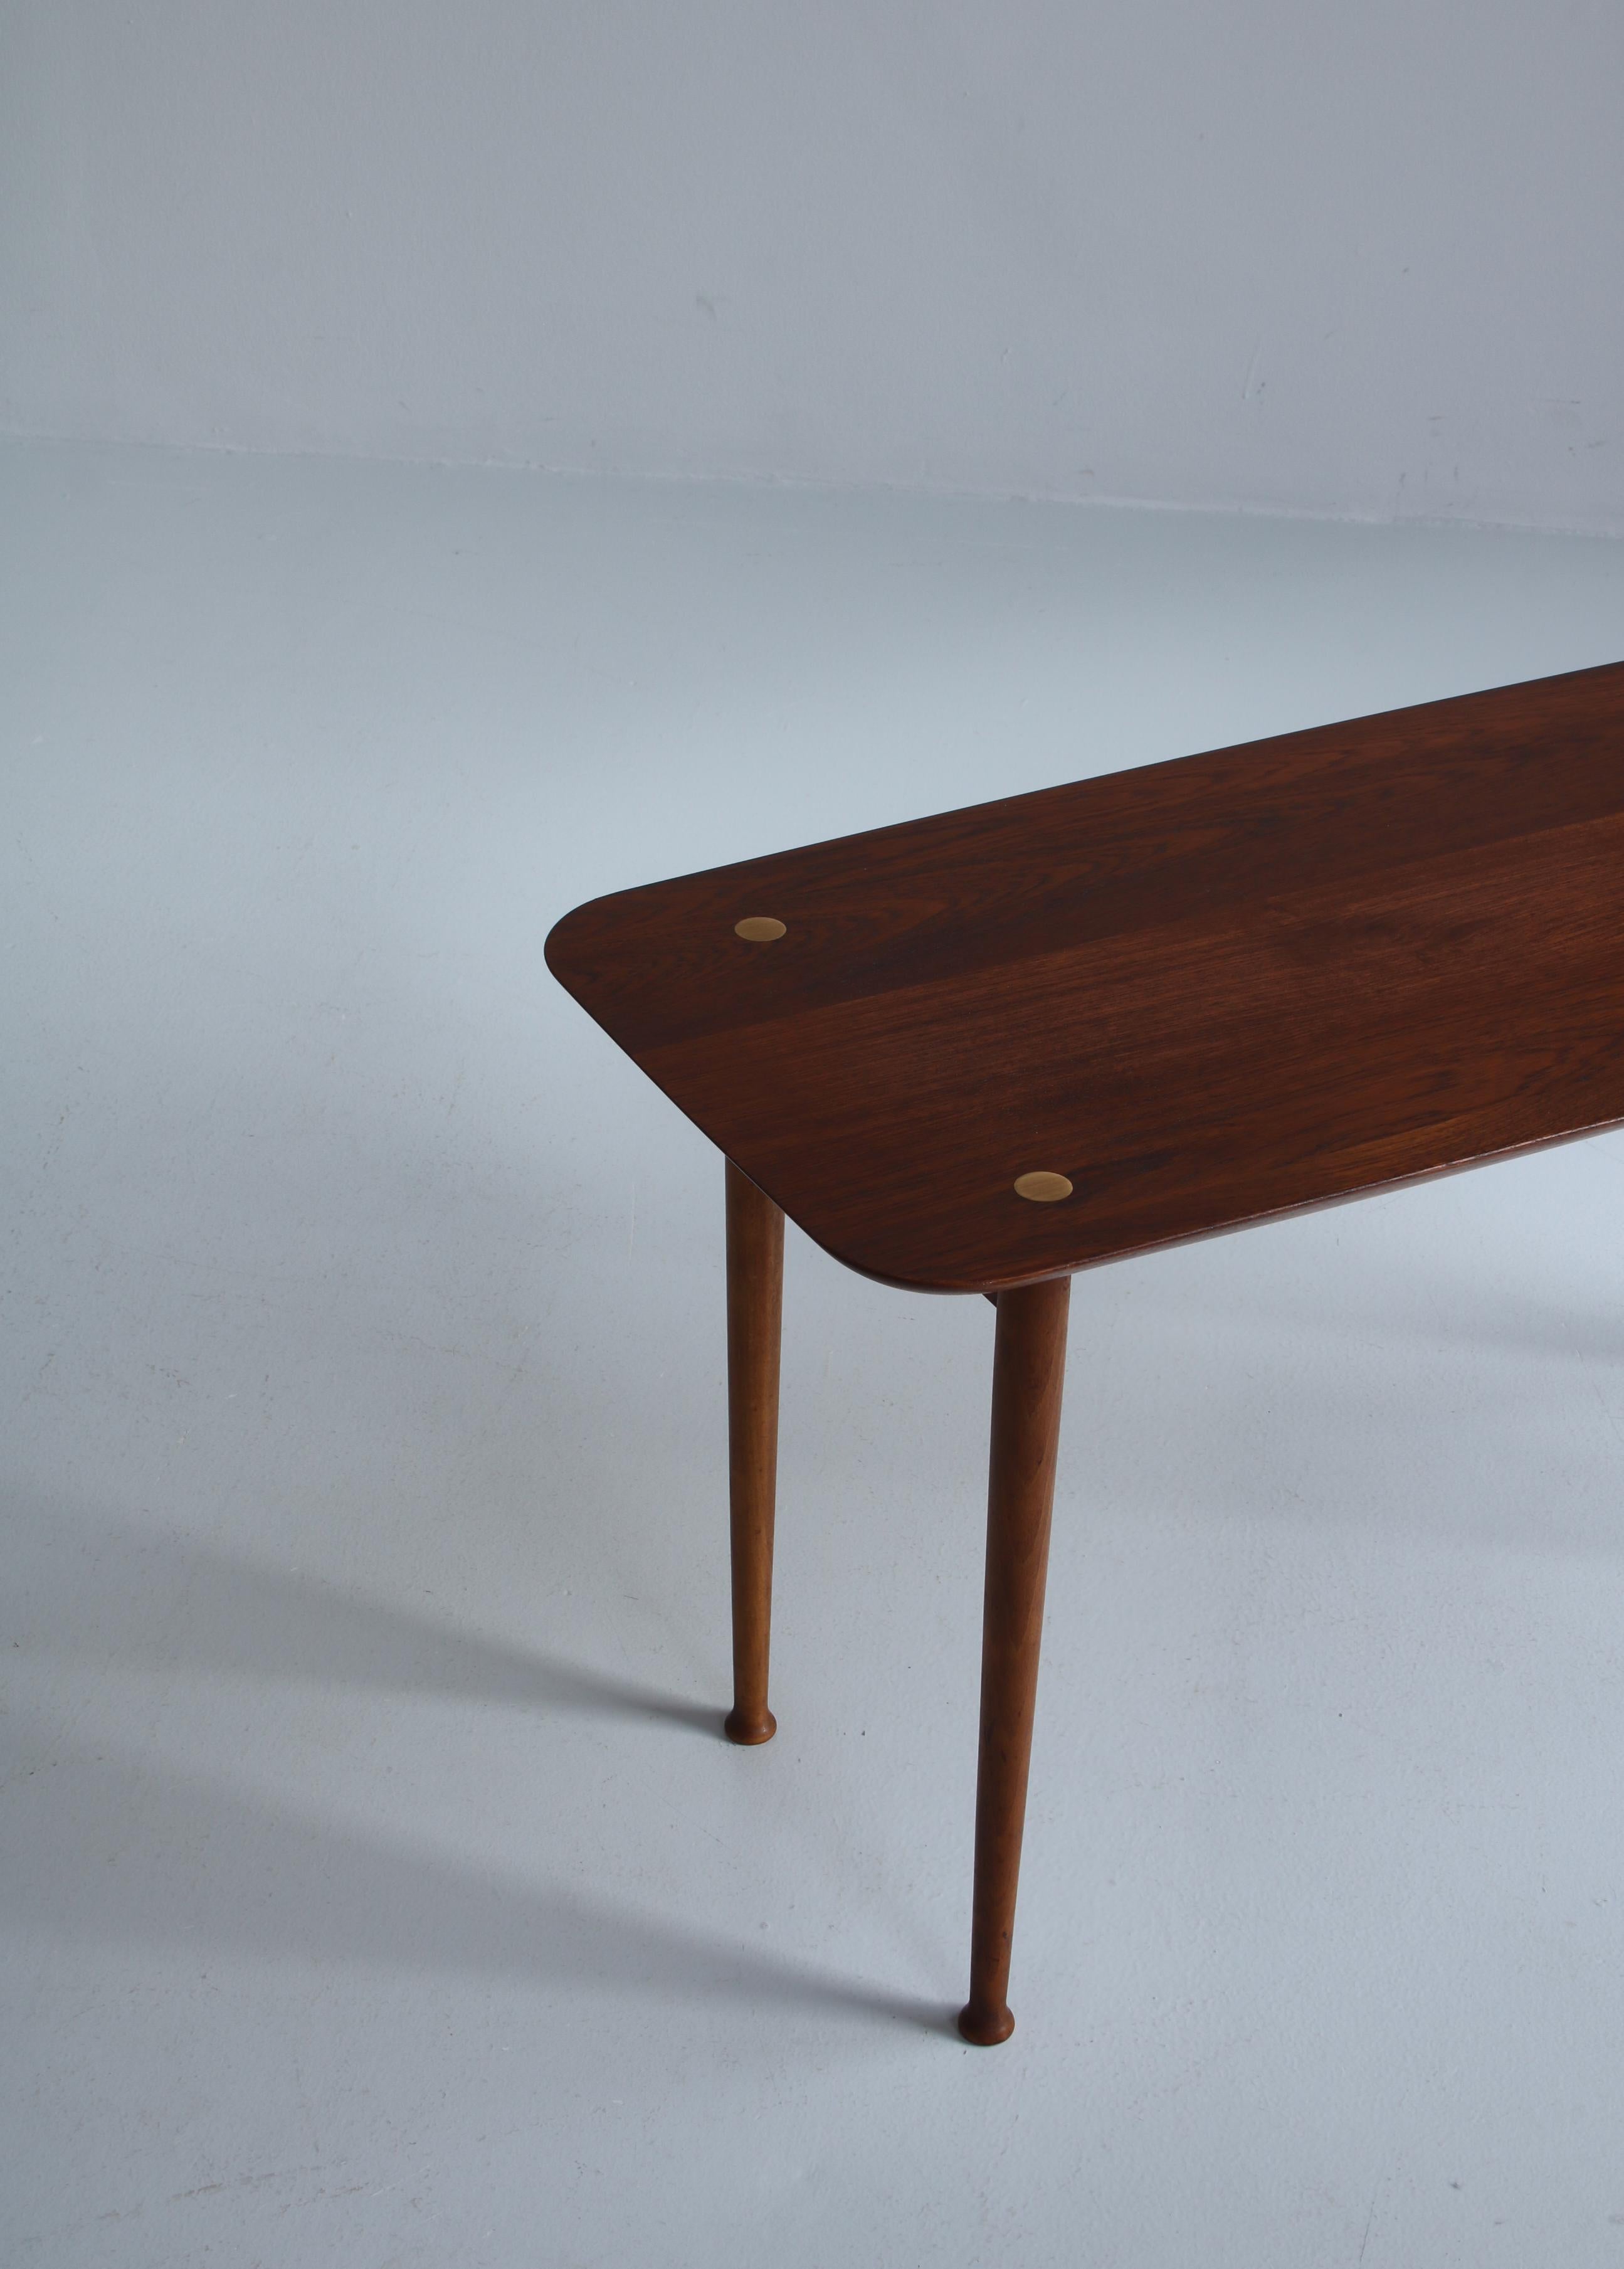 1950s Scandinavian Side Table by Danish Cabinetmaker in Teakwood and Beech In Good Condition For Sale In Odense, DK